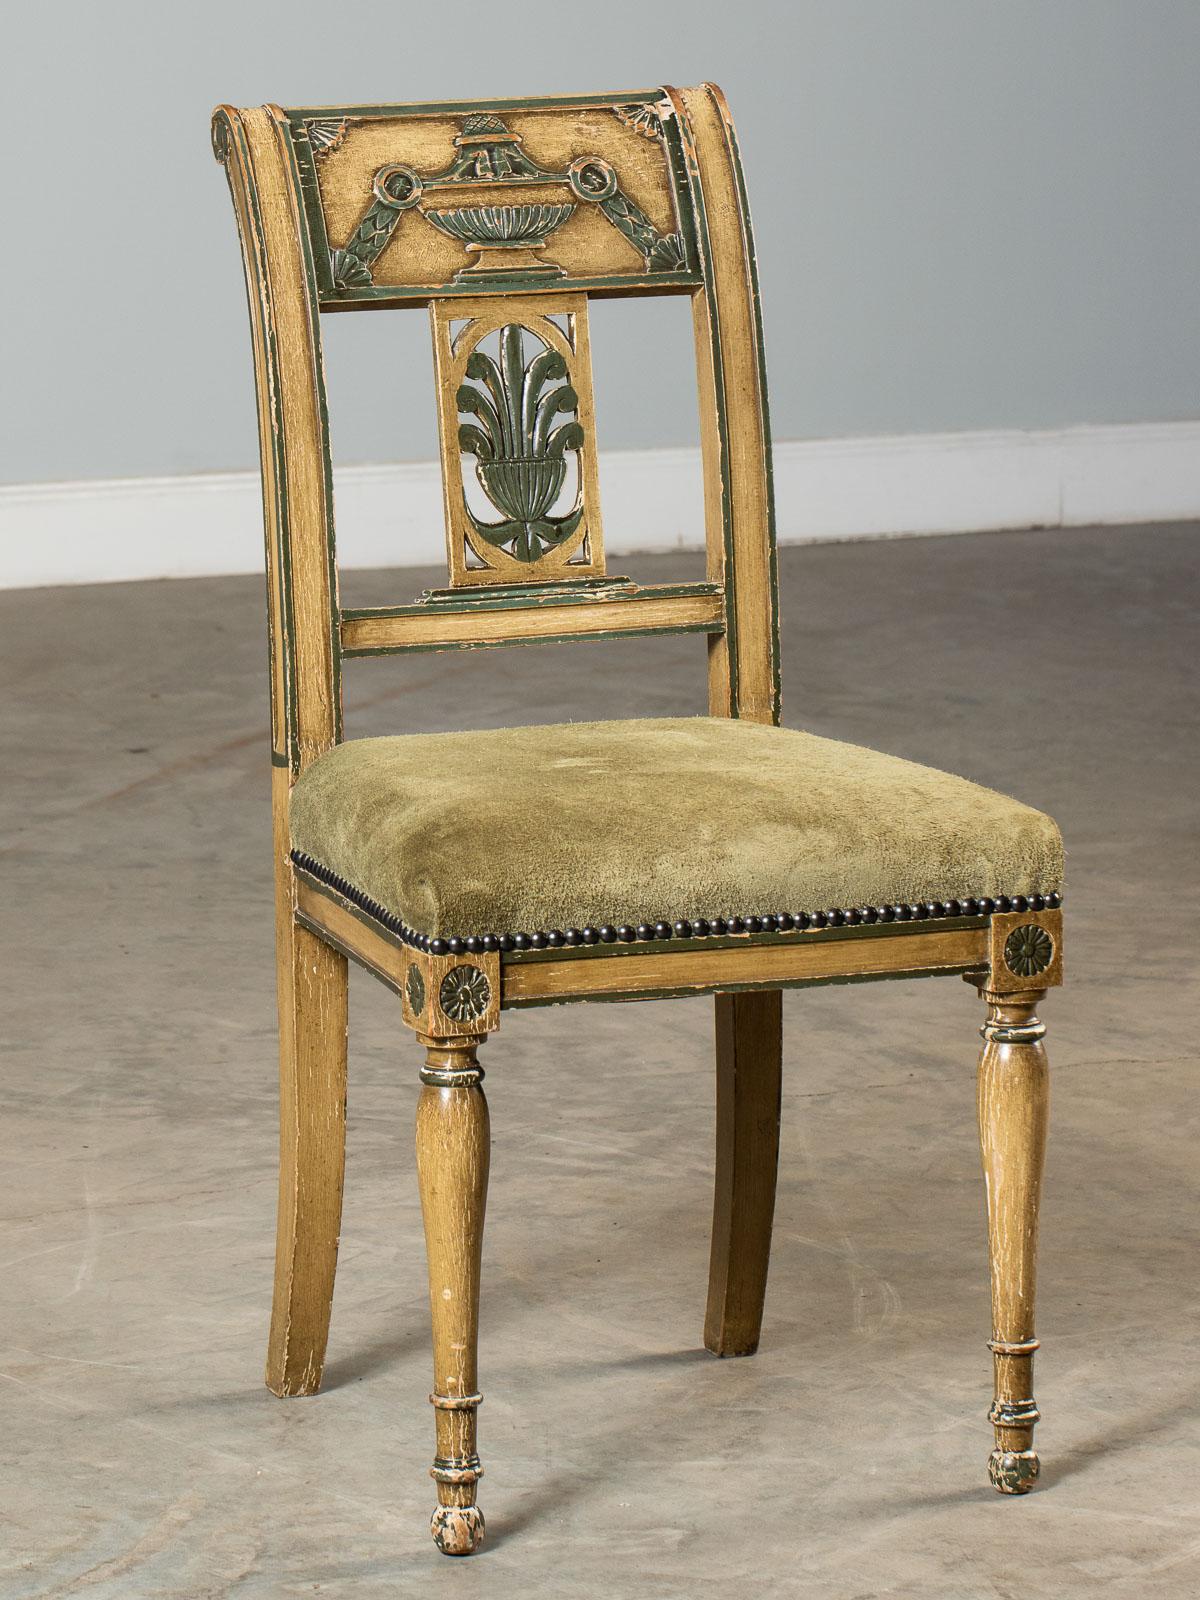 19th Century Directoire Empire Style Antique French Painted Chair, circa 1850